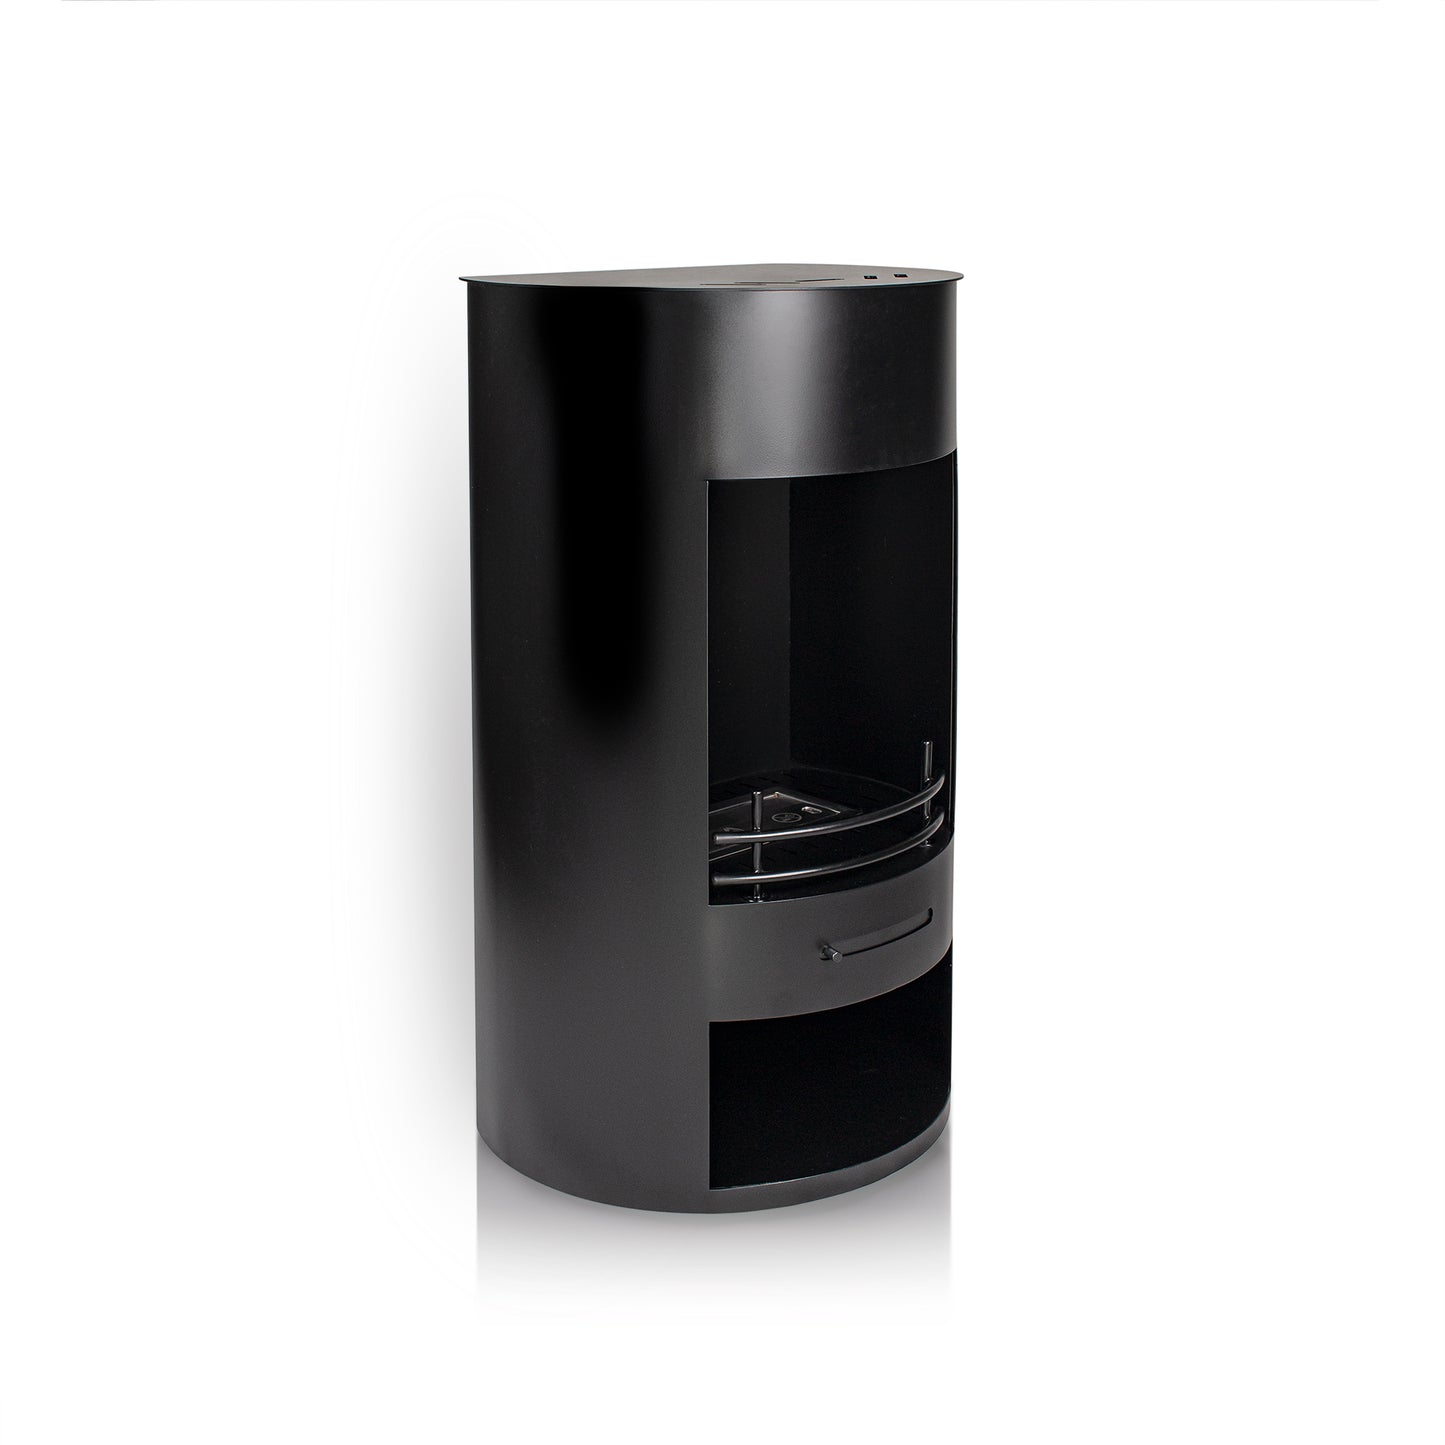 LUNA Black Modern Bioethanol Stove without any accessories